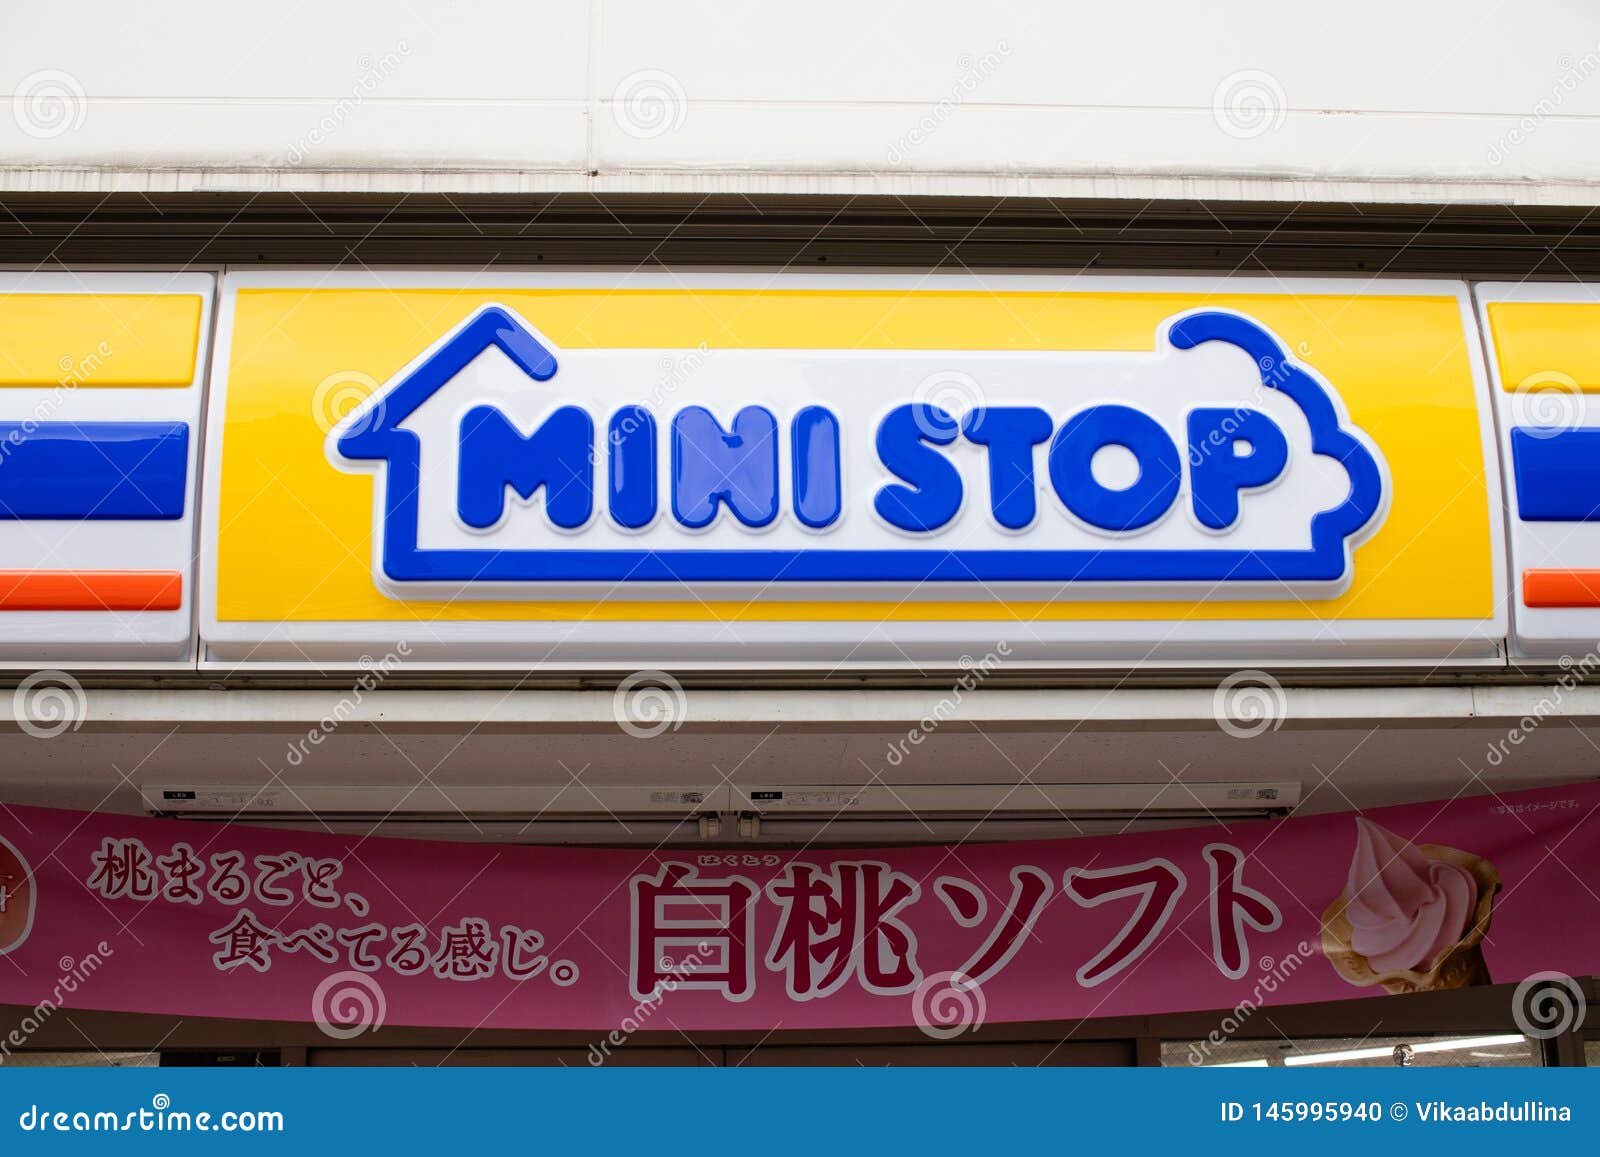 Ministop Photos Free Royalty Free Stock Photos From Dreamstime